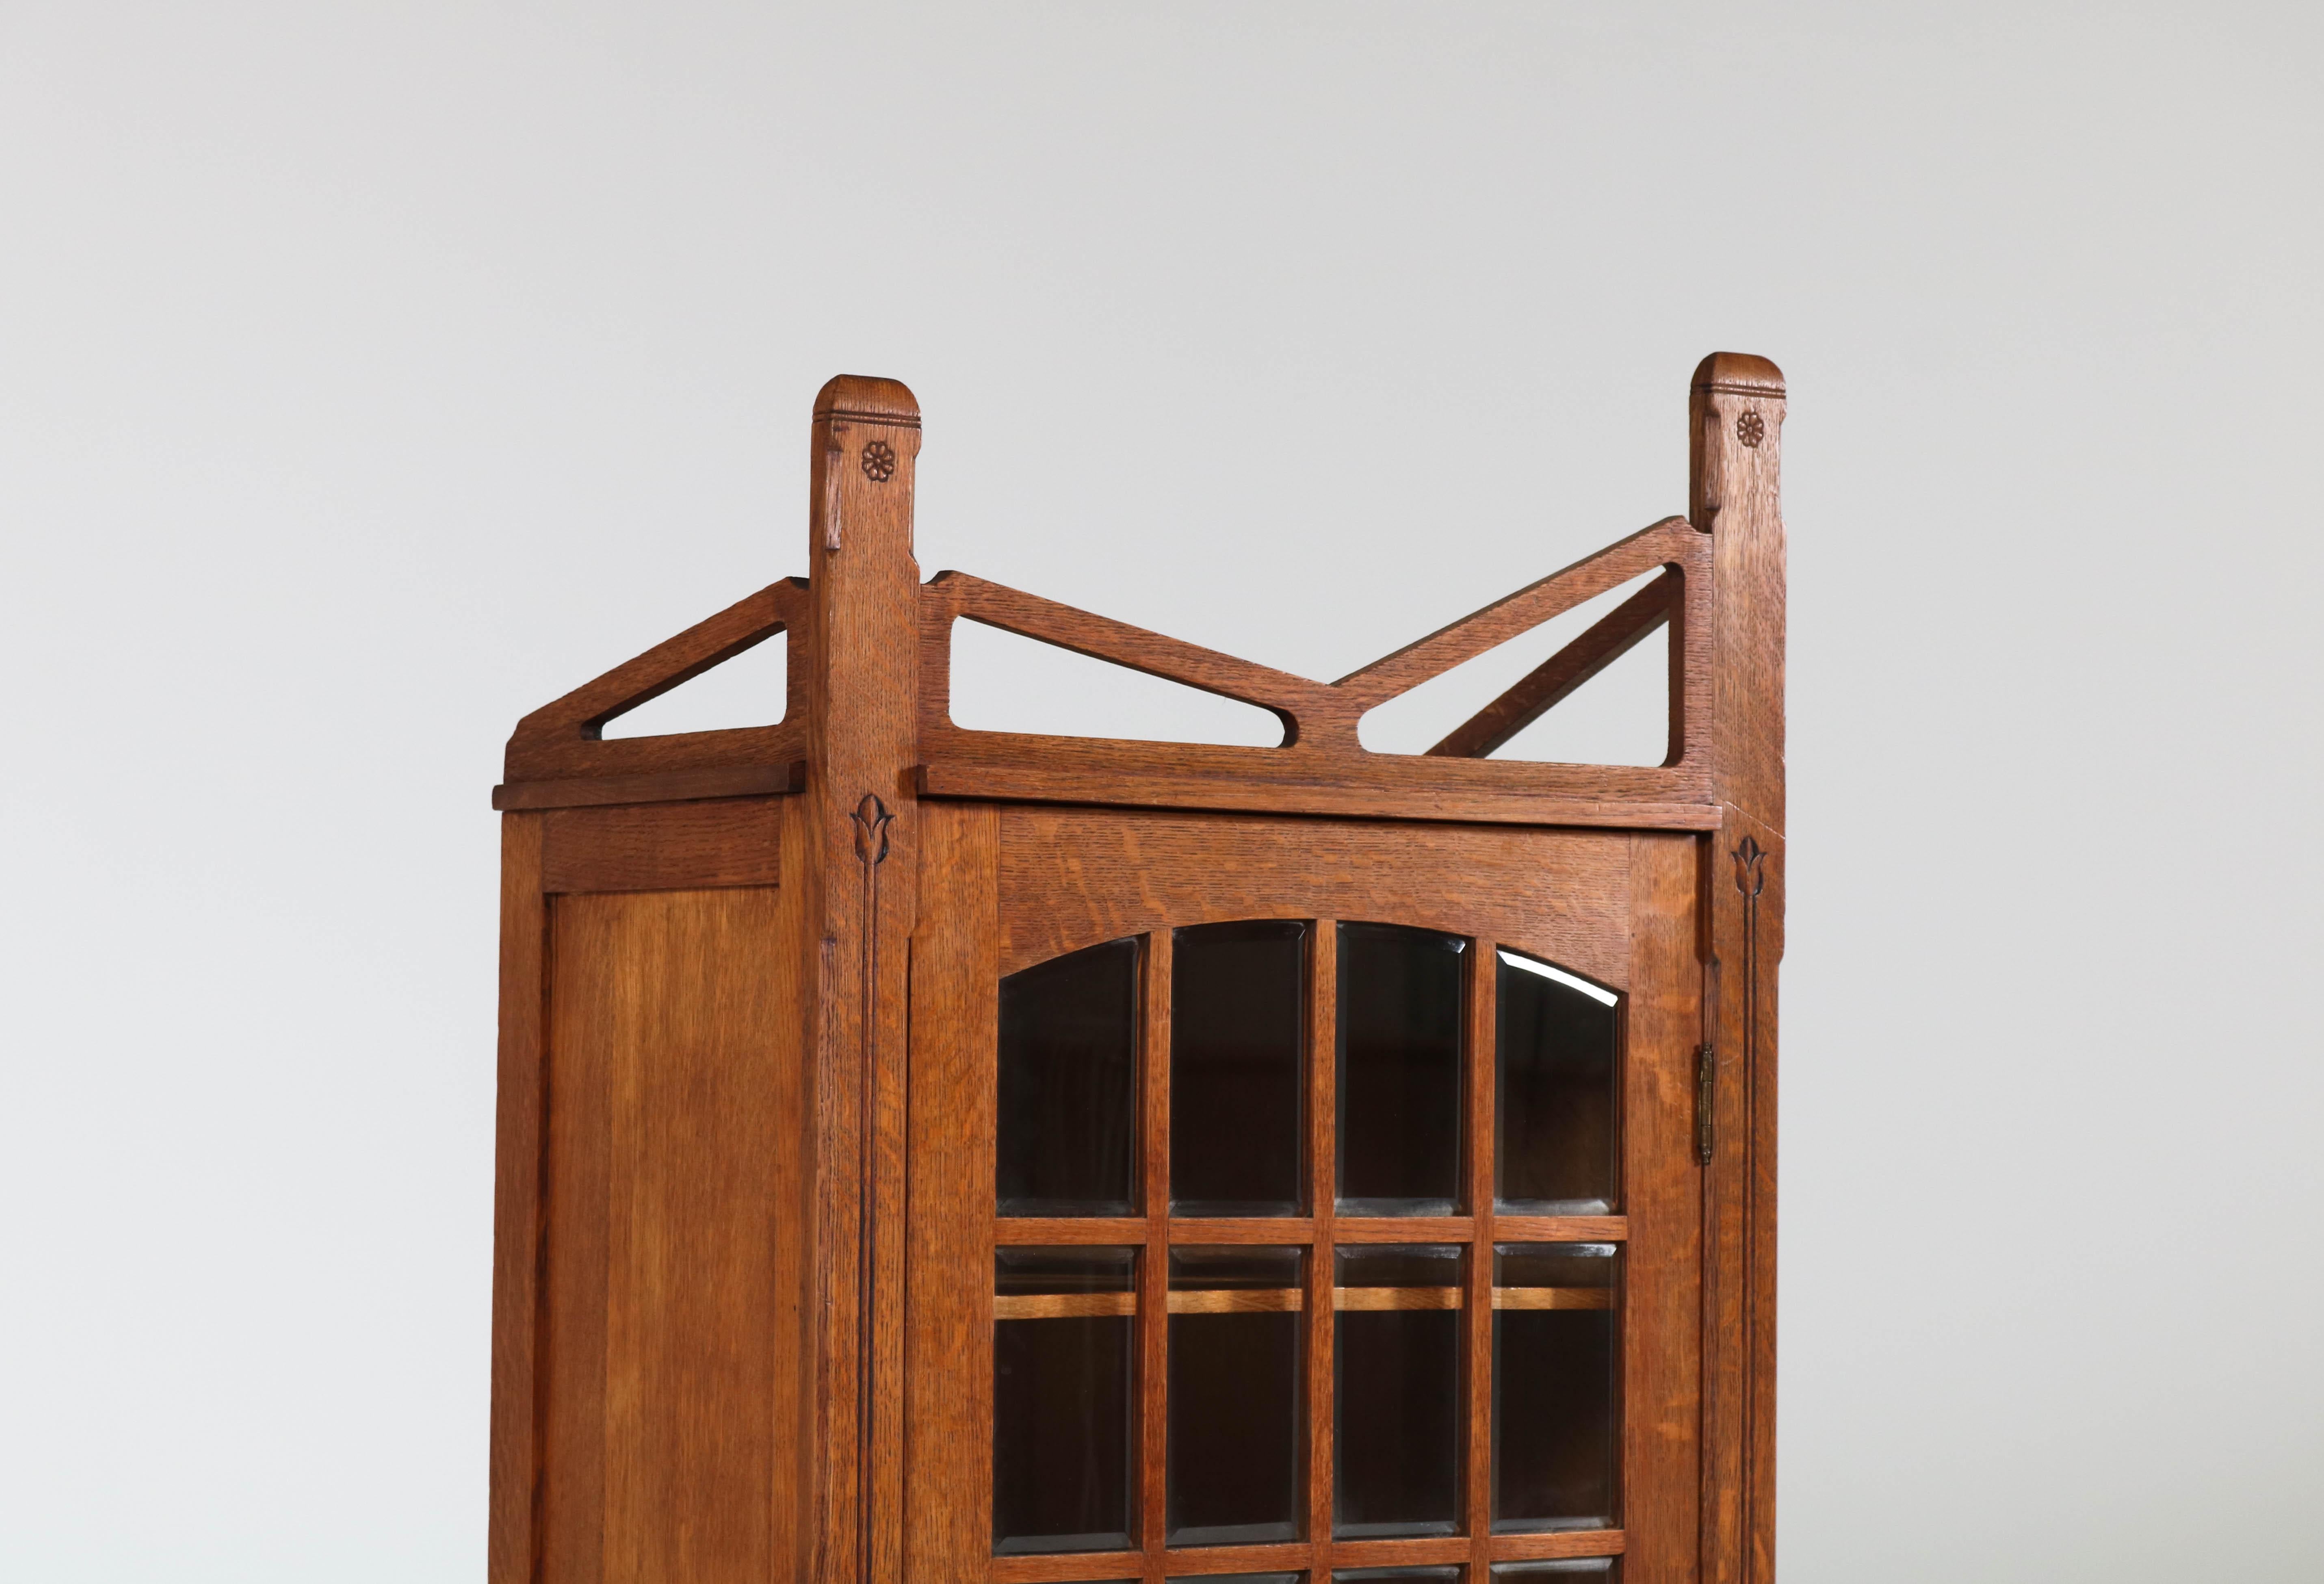 Wonderful and rare Art Nouveau Arts & Crafts bookcase with inlay.
Striking Dutch design from the 1900s.
Solid oak with original bevelled glass.
Marked with metal tag Prins Culemborg.
In good original condition with minor wear consistent with age